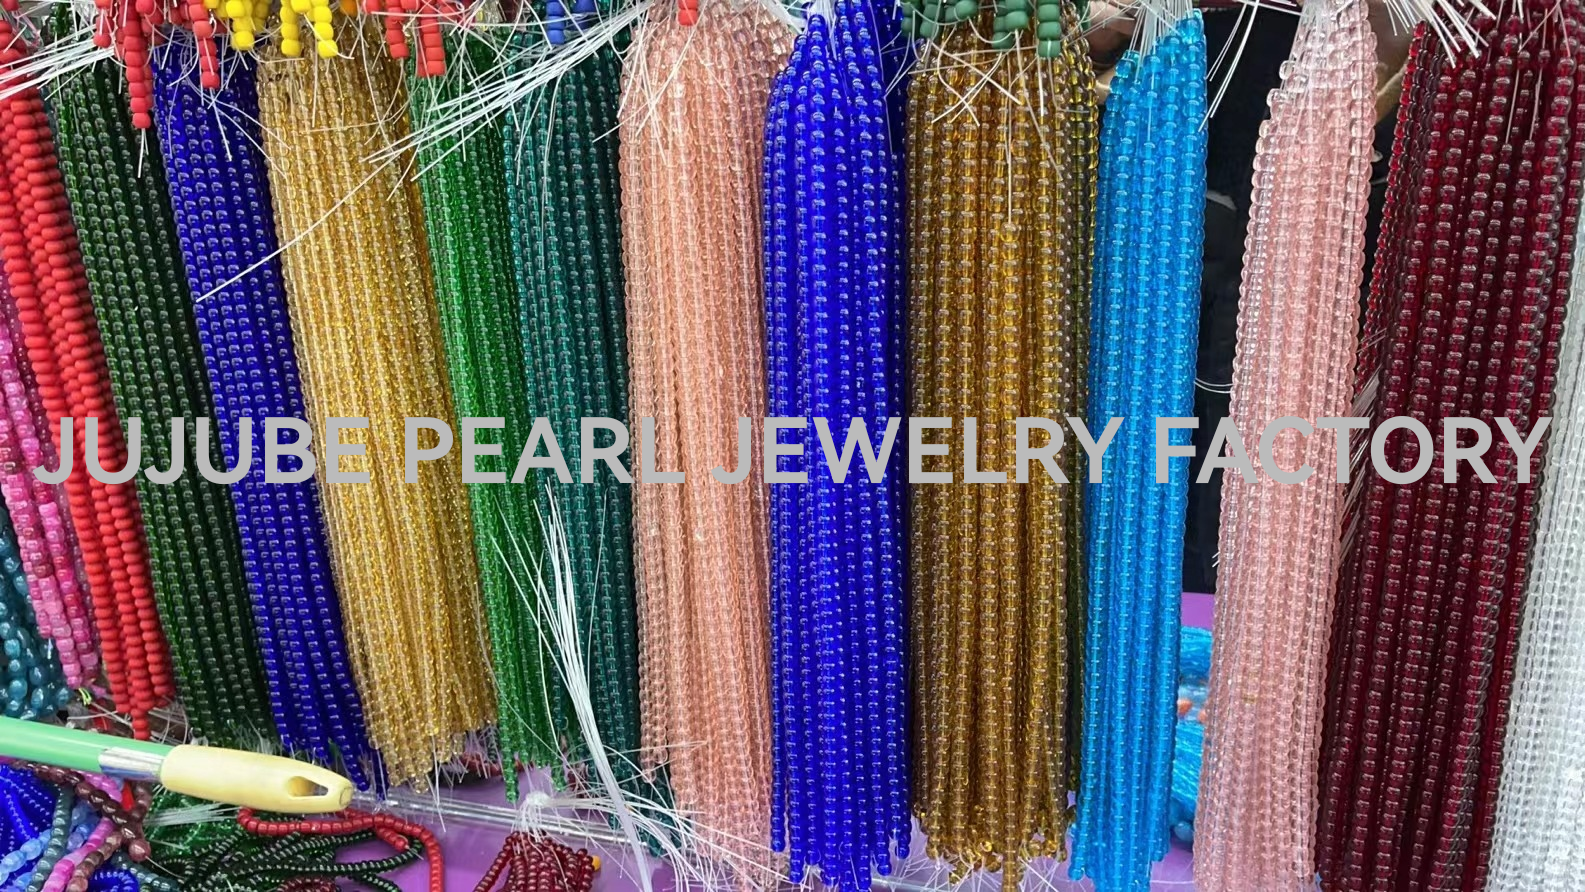 Fine crystal beads glass beads bracelets necklaces door curtains decorative clothing accessories